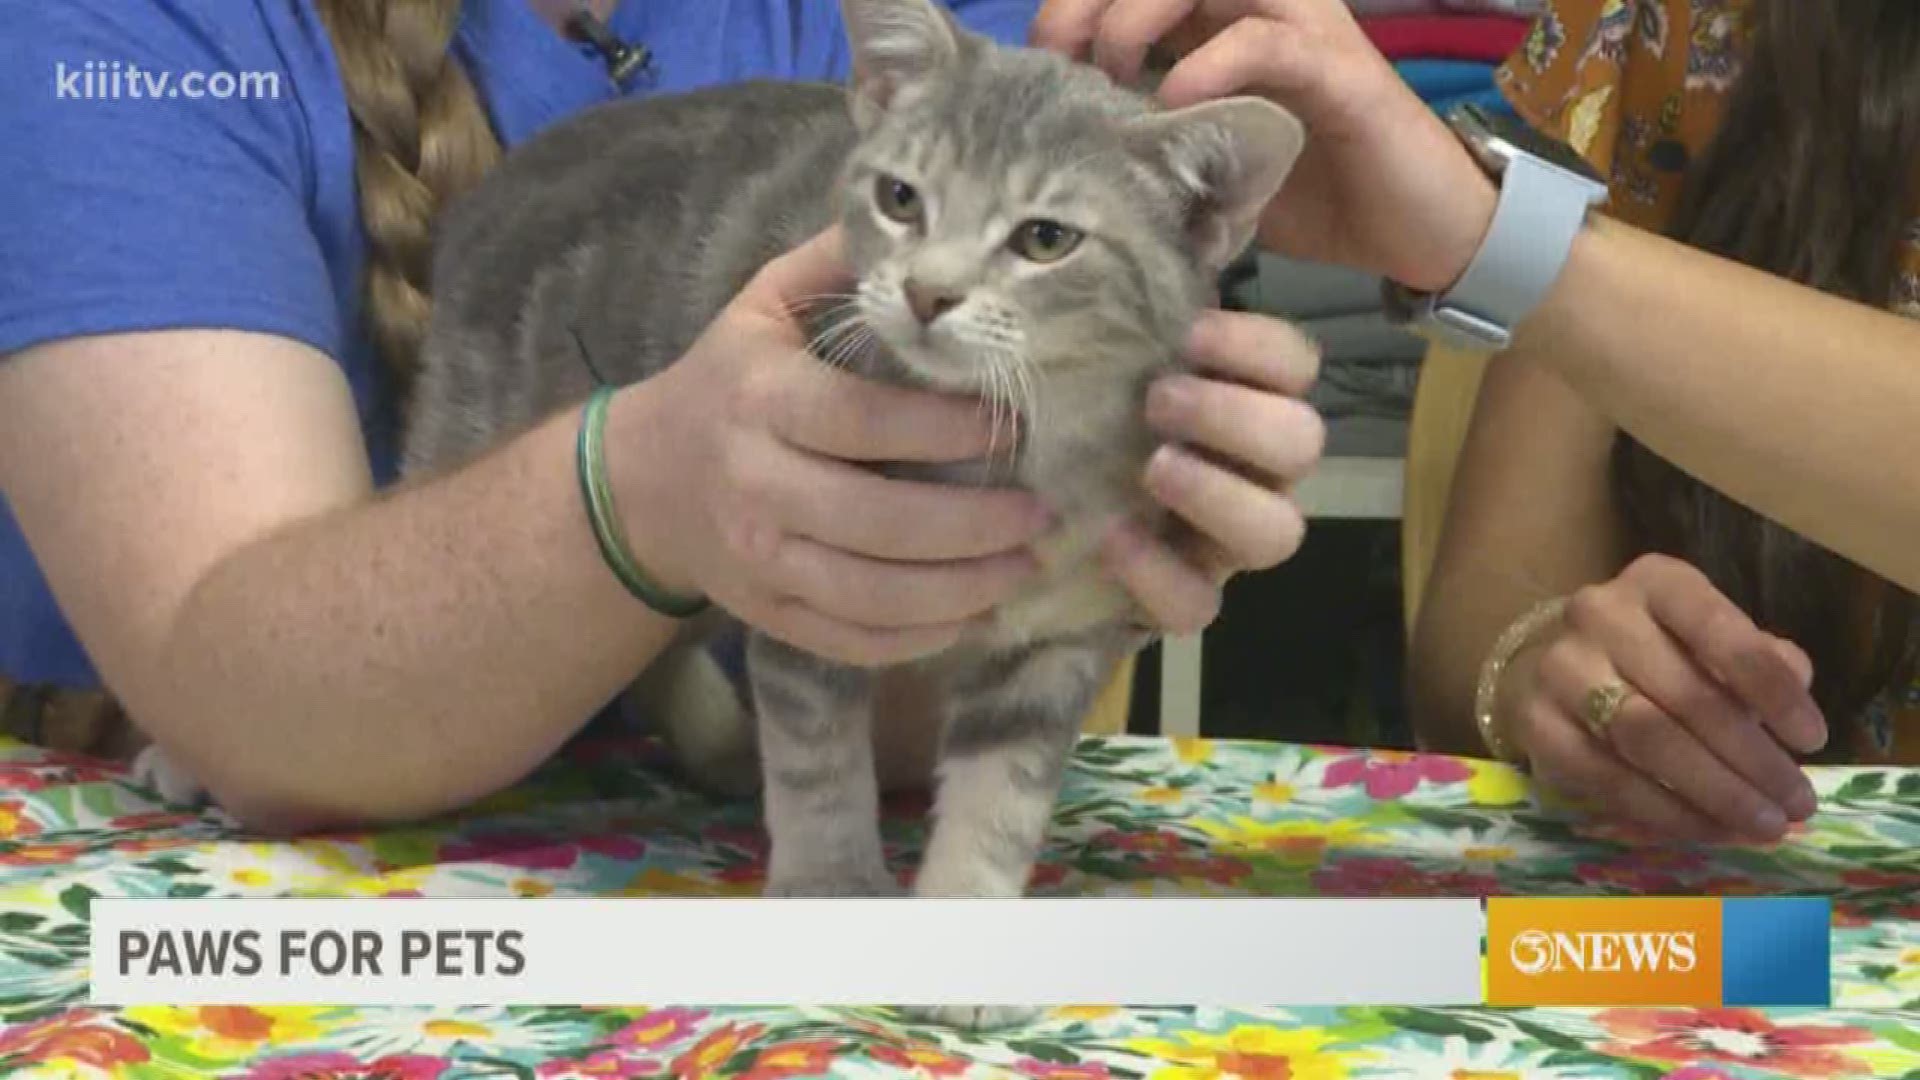 Meet today's featured pet from The Cattery Cat Shelter in Corpus Christi